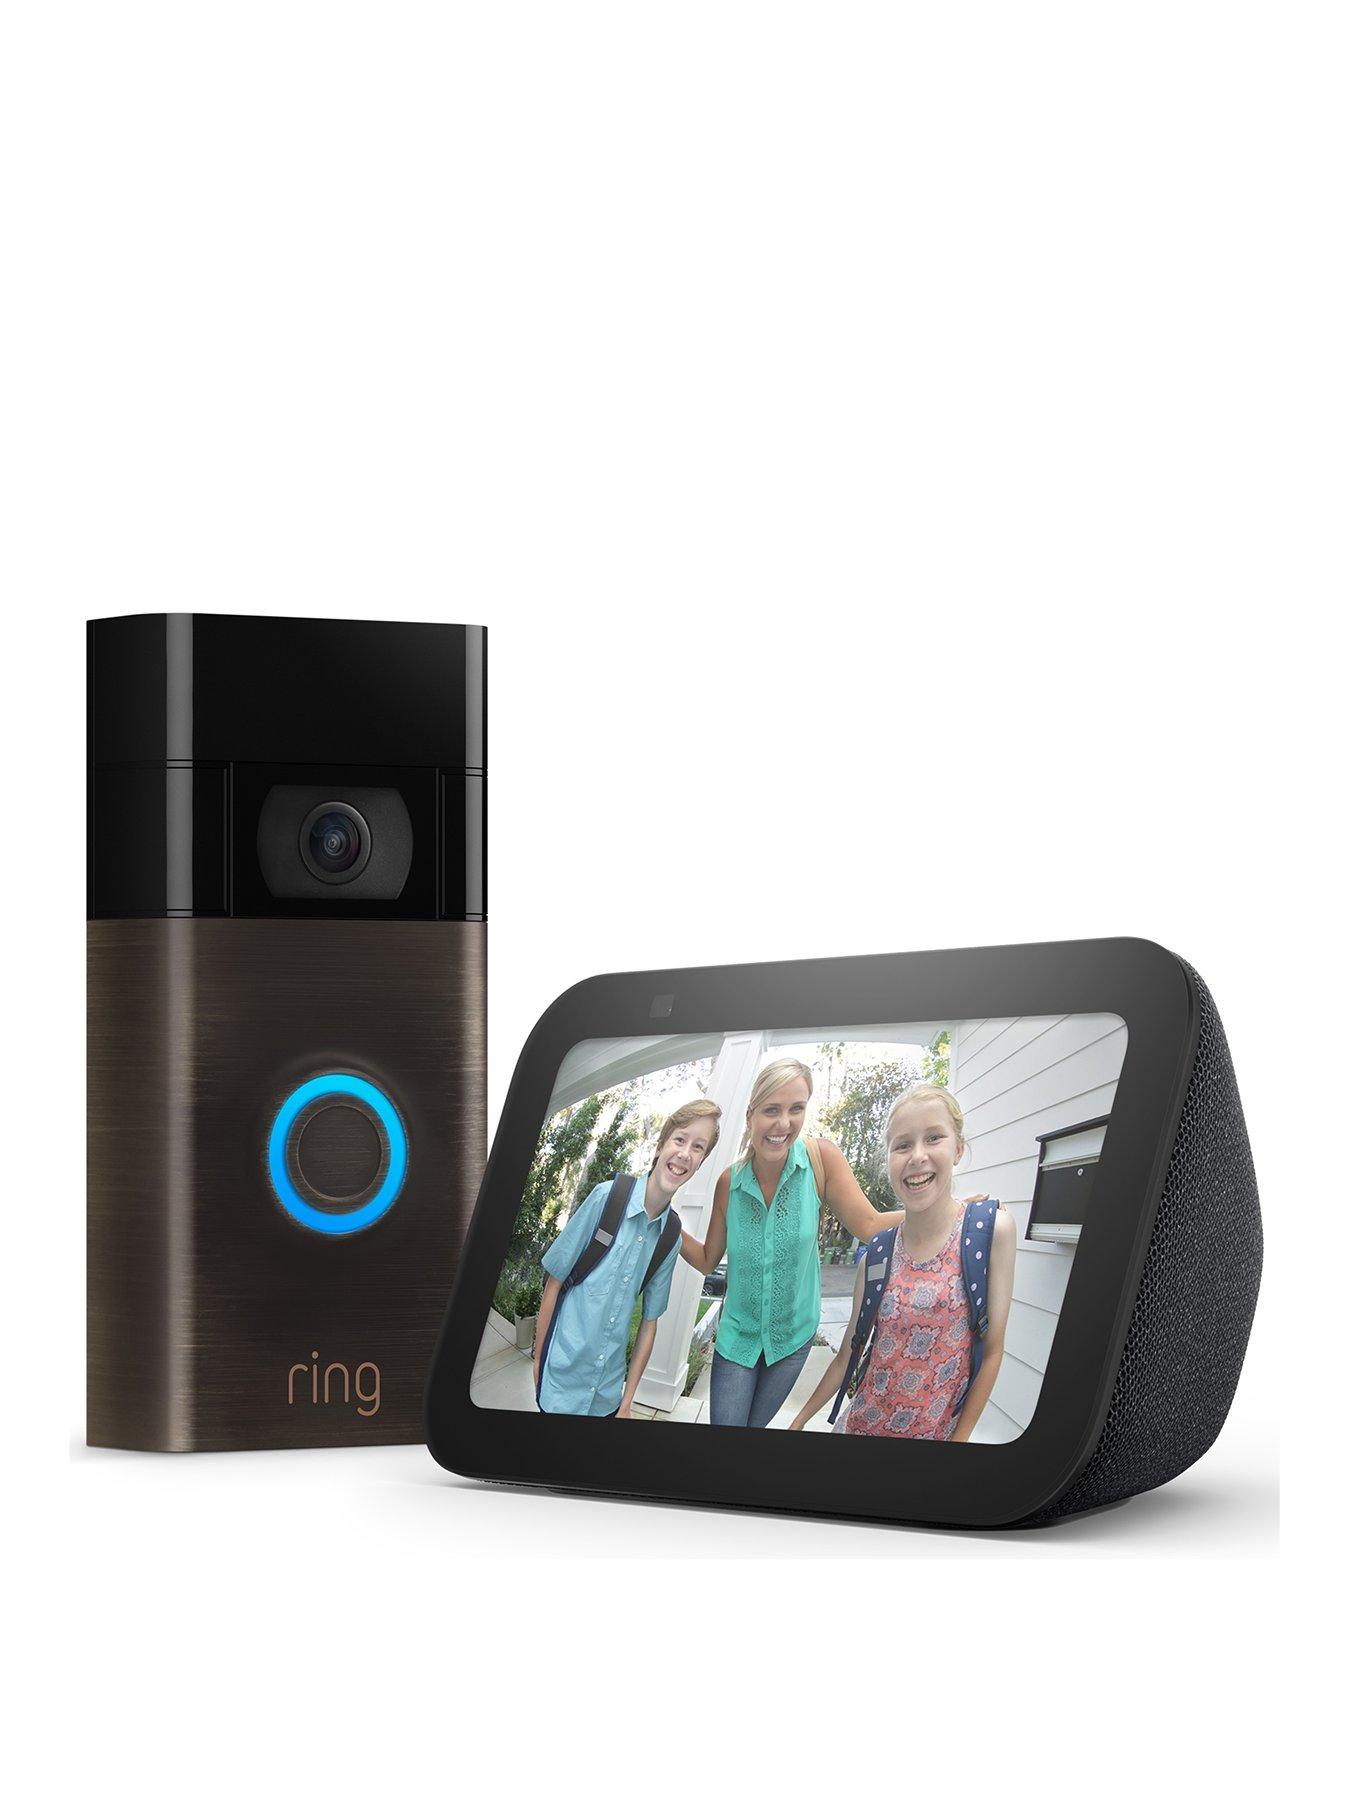 RING Video Doorbell with Amazon Echo Show 5 | very.co.uk